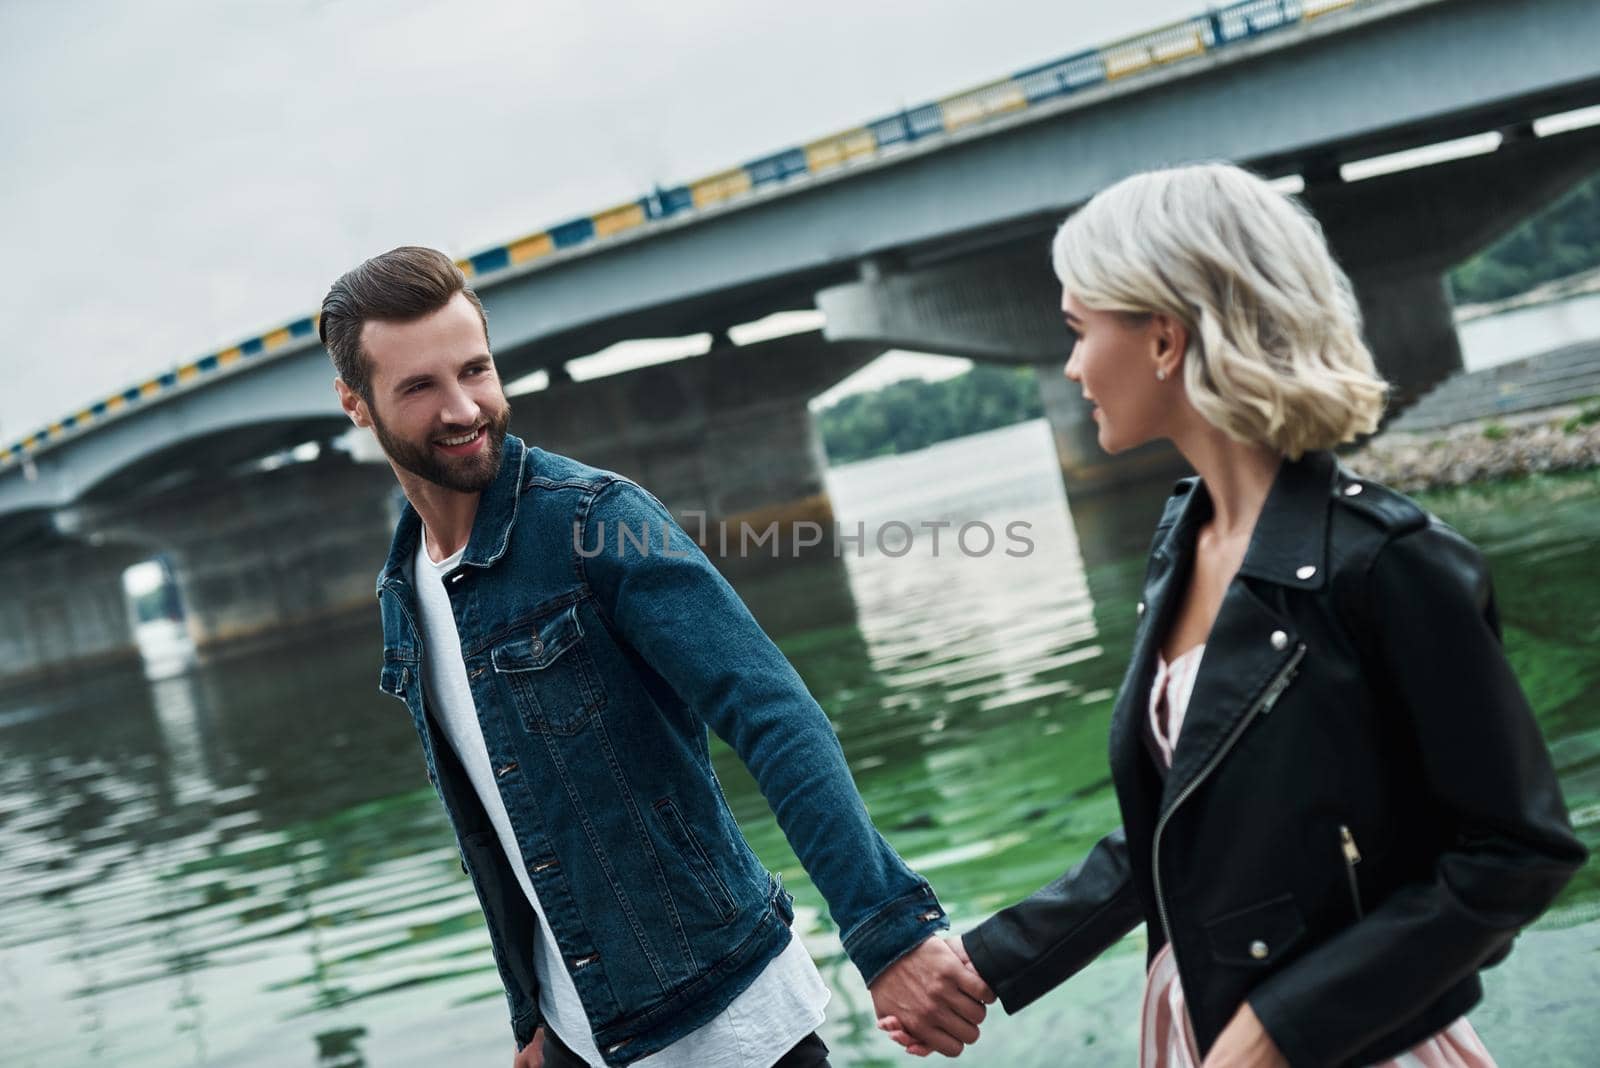 Romantic date outdoors. Young couple walking on the city street near water holding hands looking at each other talking smiling joyful by friendsstock